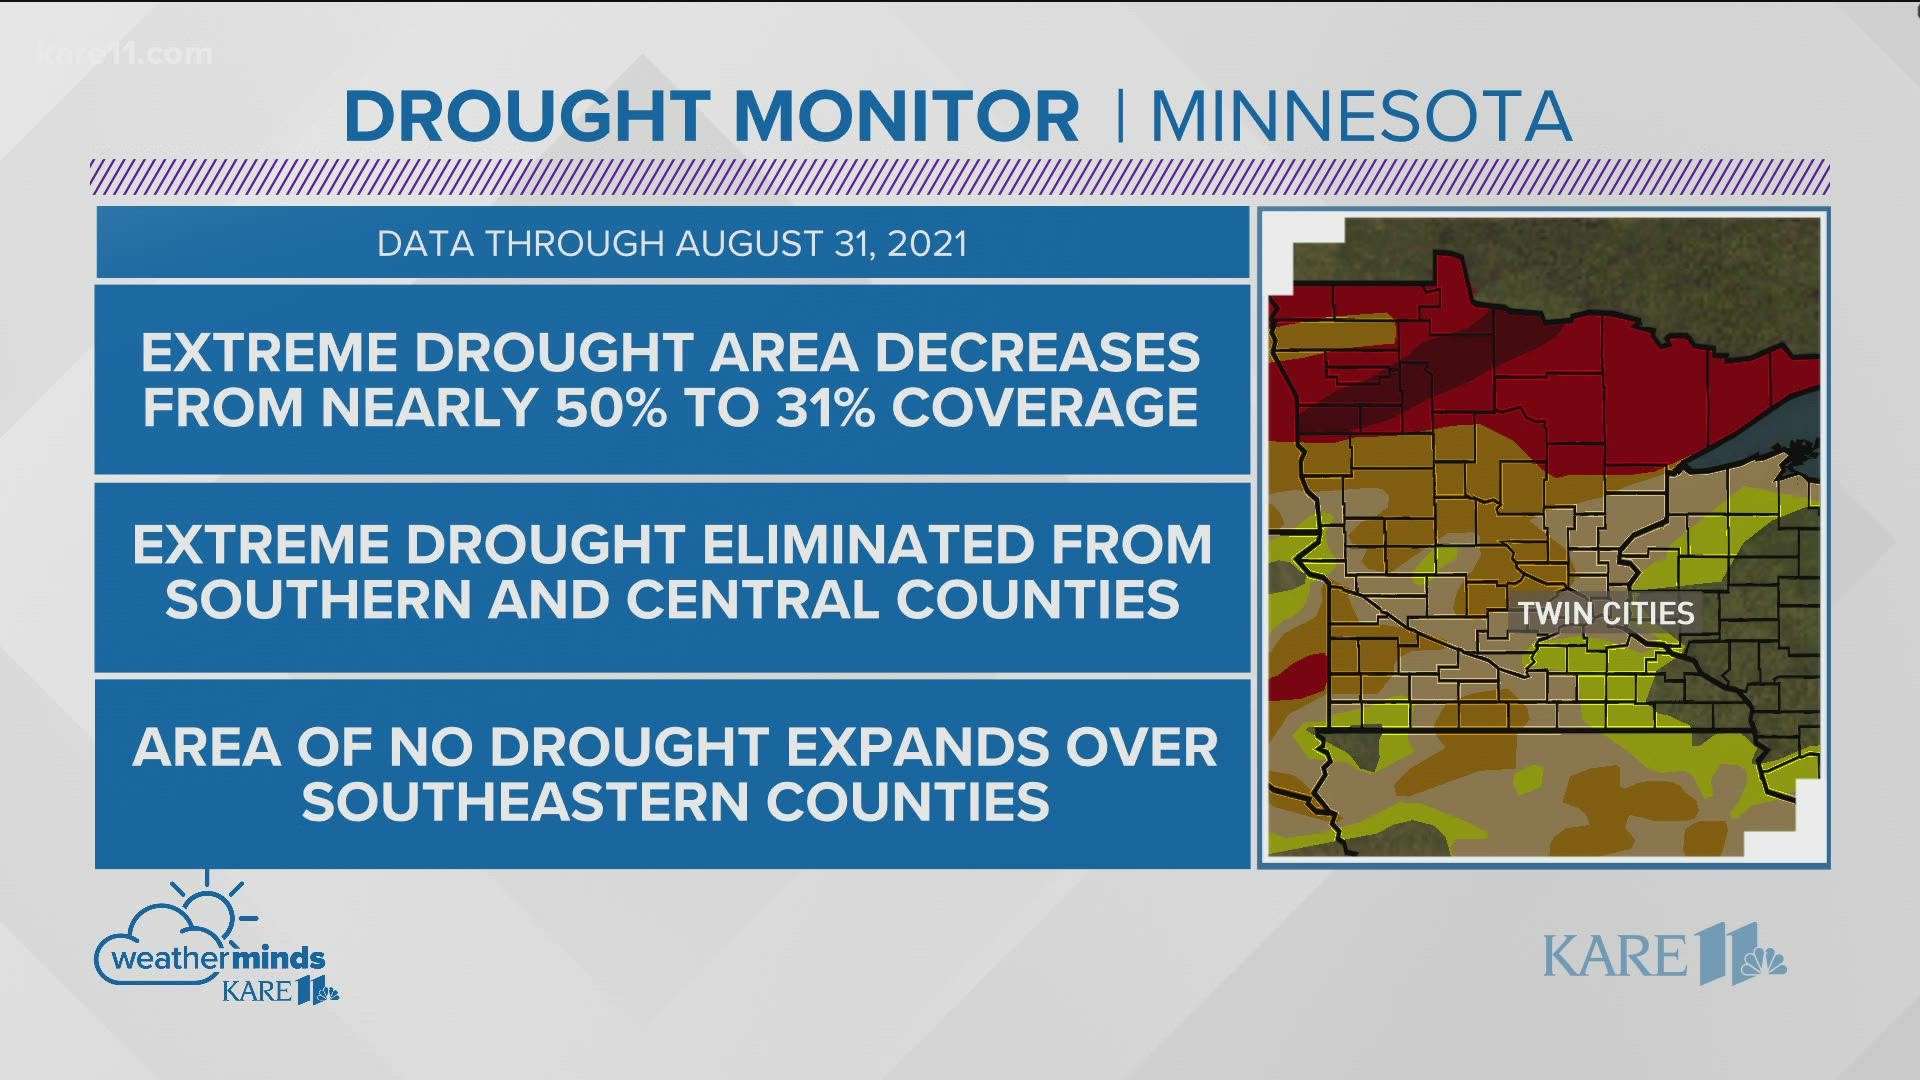 With heavy rainfall in late August, there's major improvements for central and southern Minnesota's drought classification.